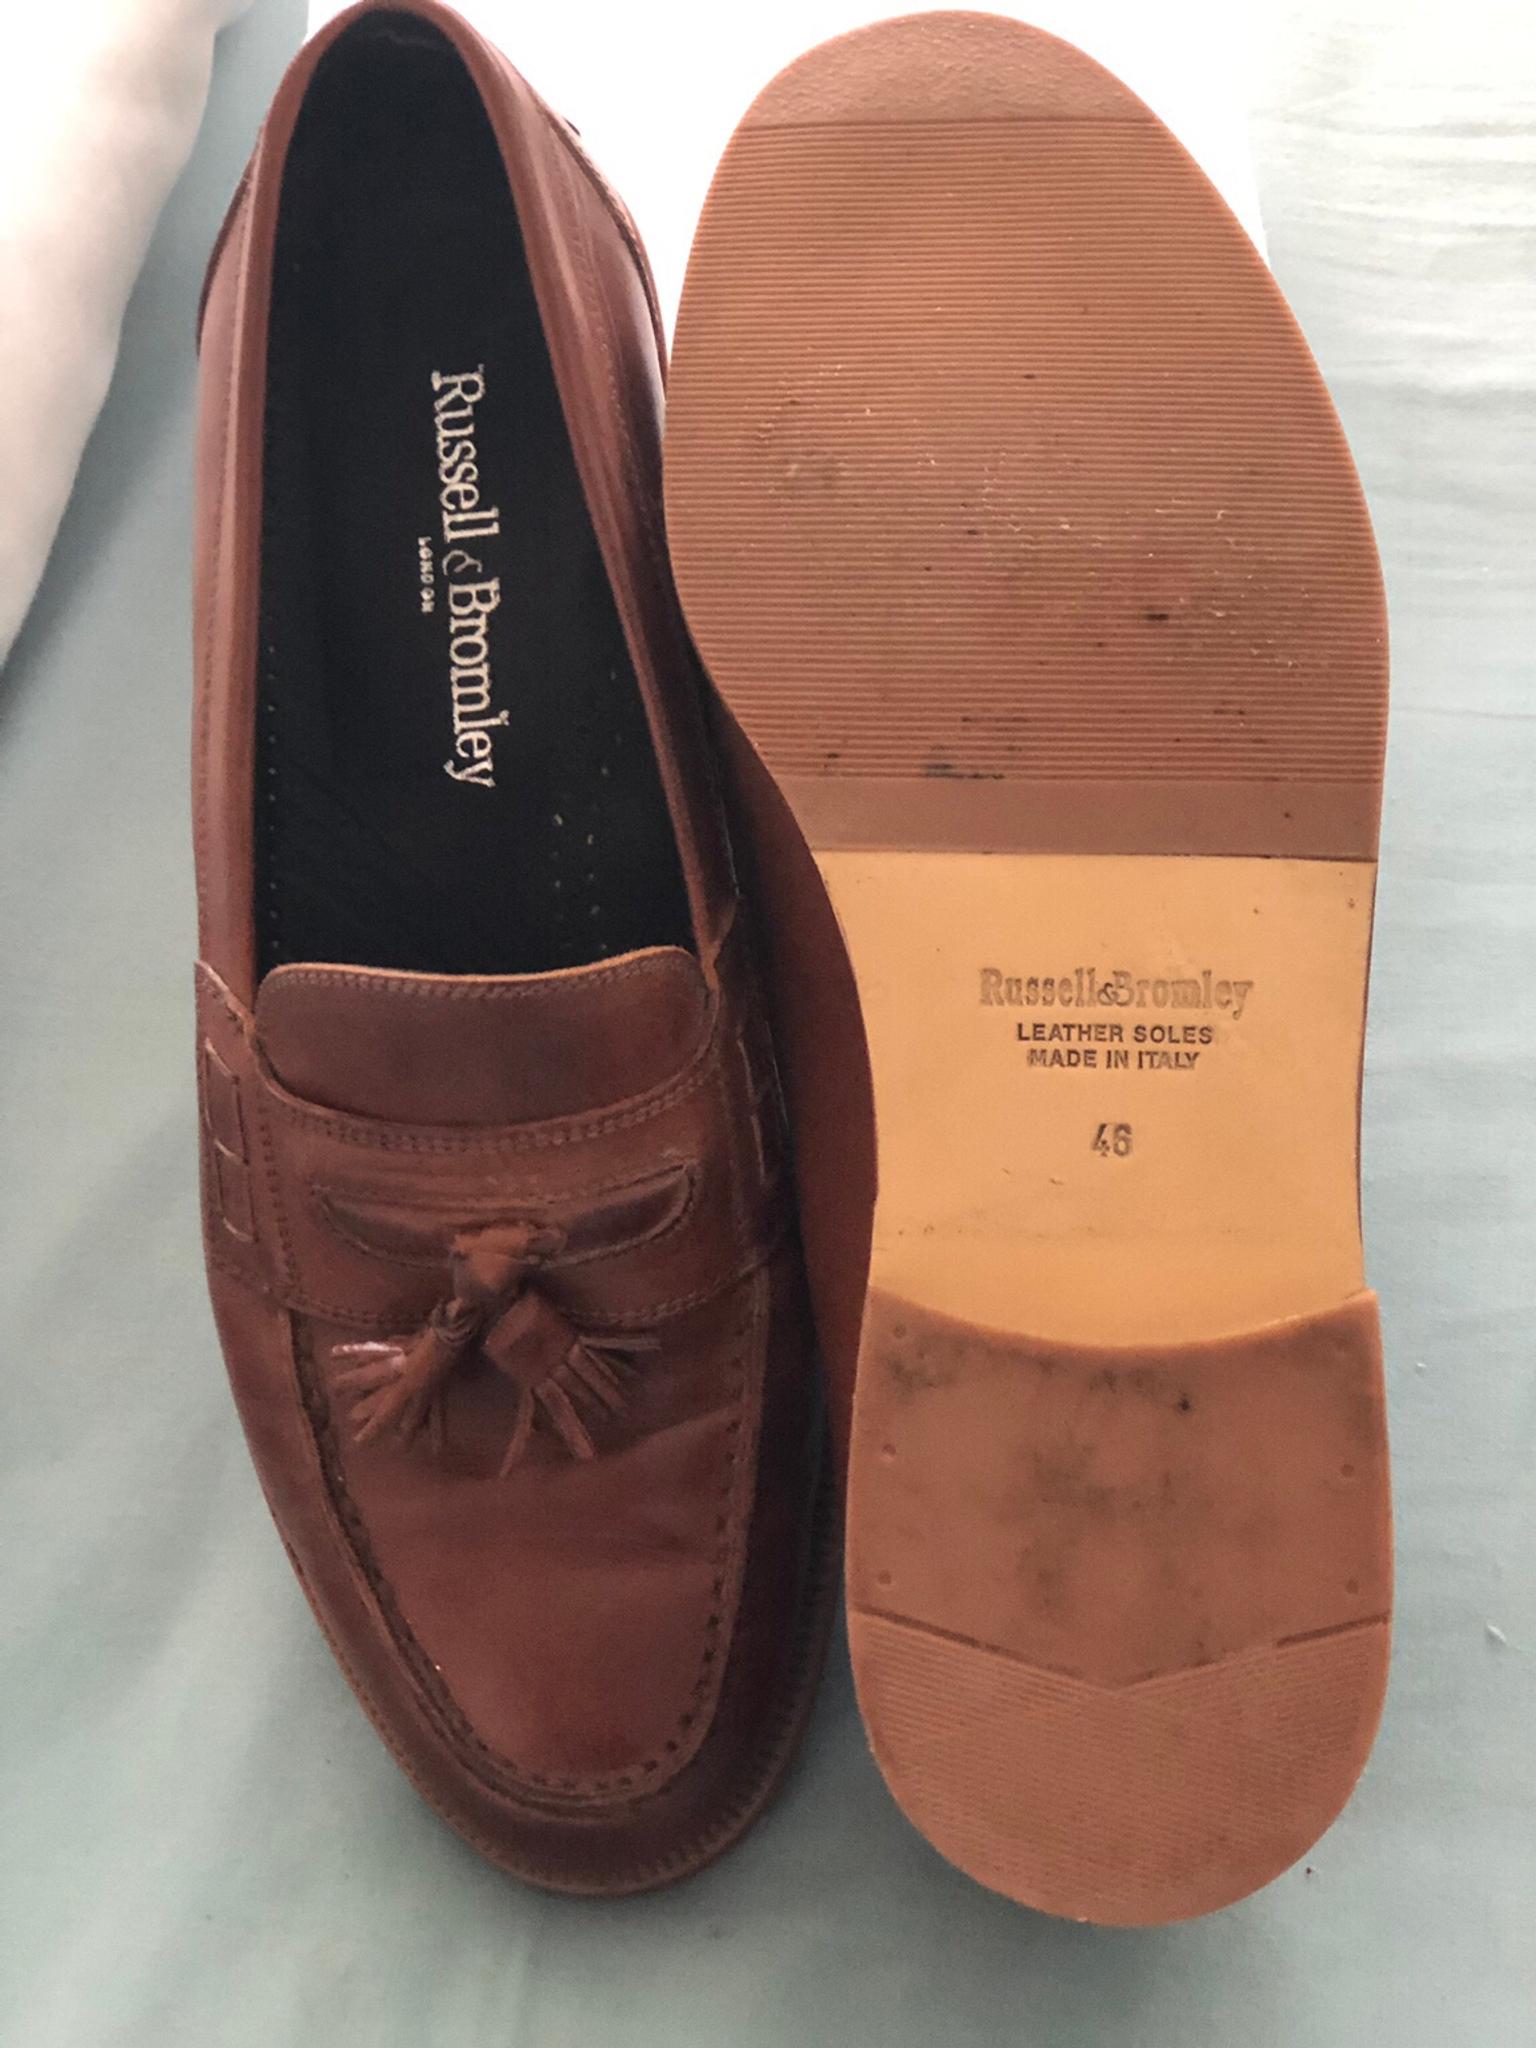 russell and bromley loafers